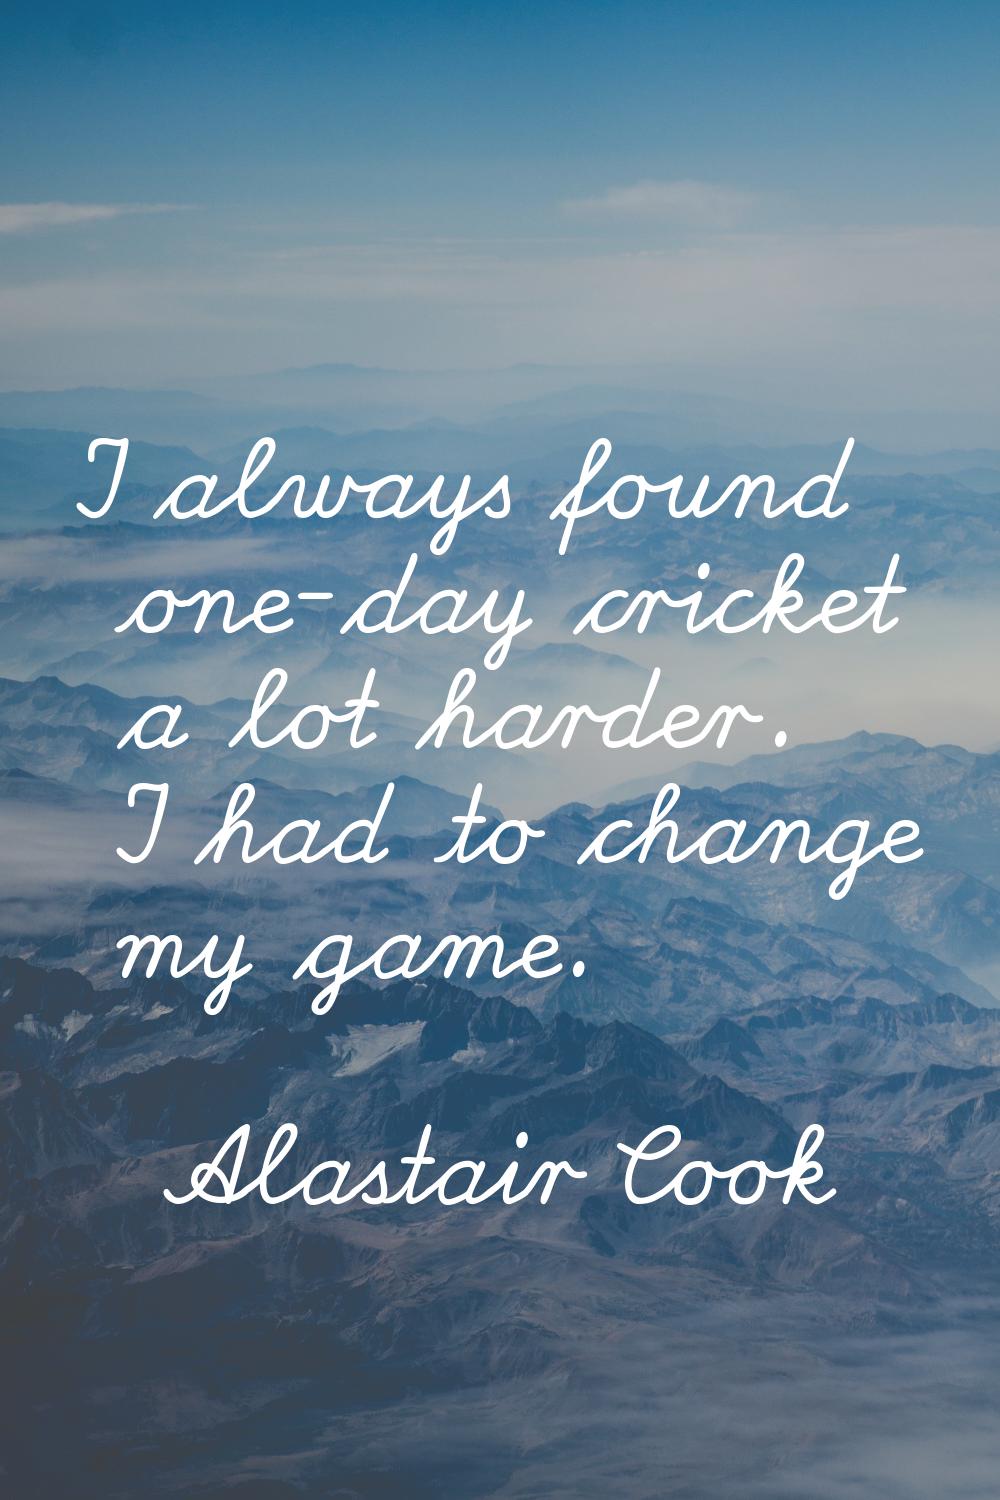 I always found one-day cricket a lot harder. I had to change my game.